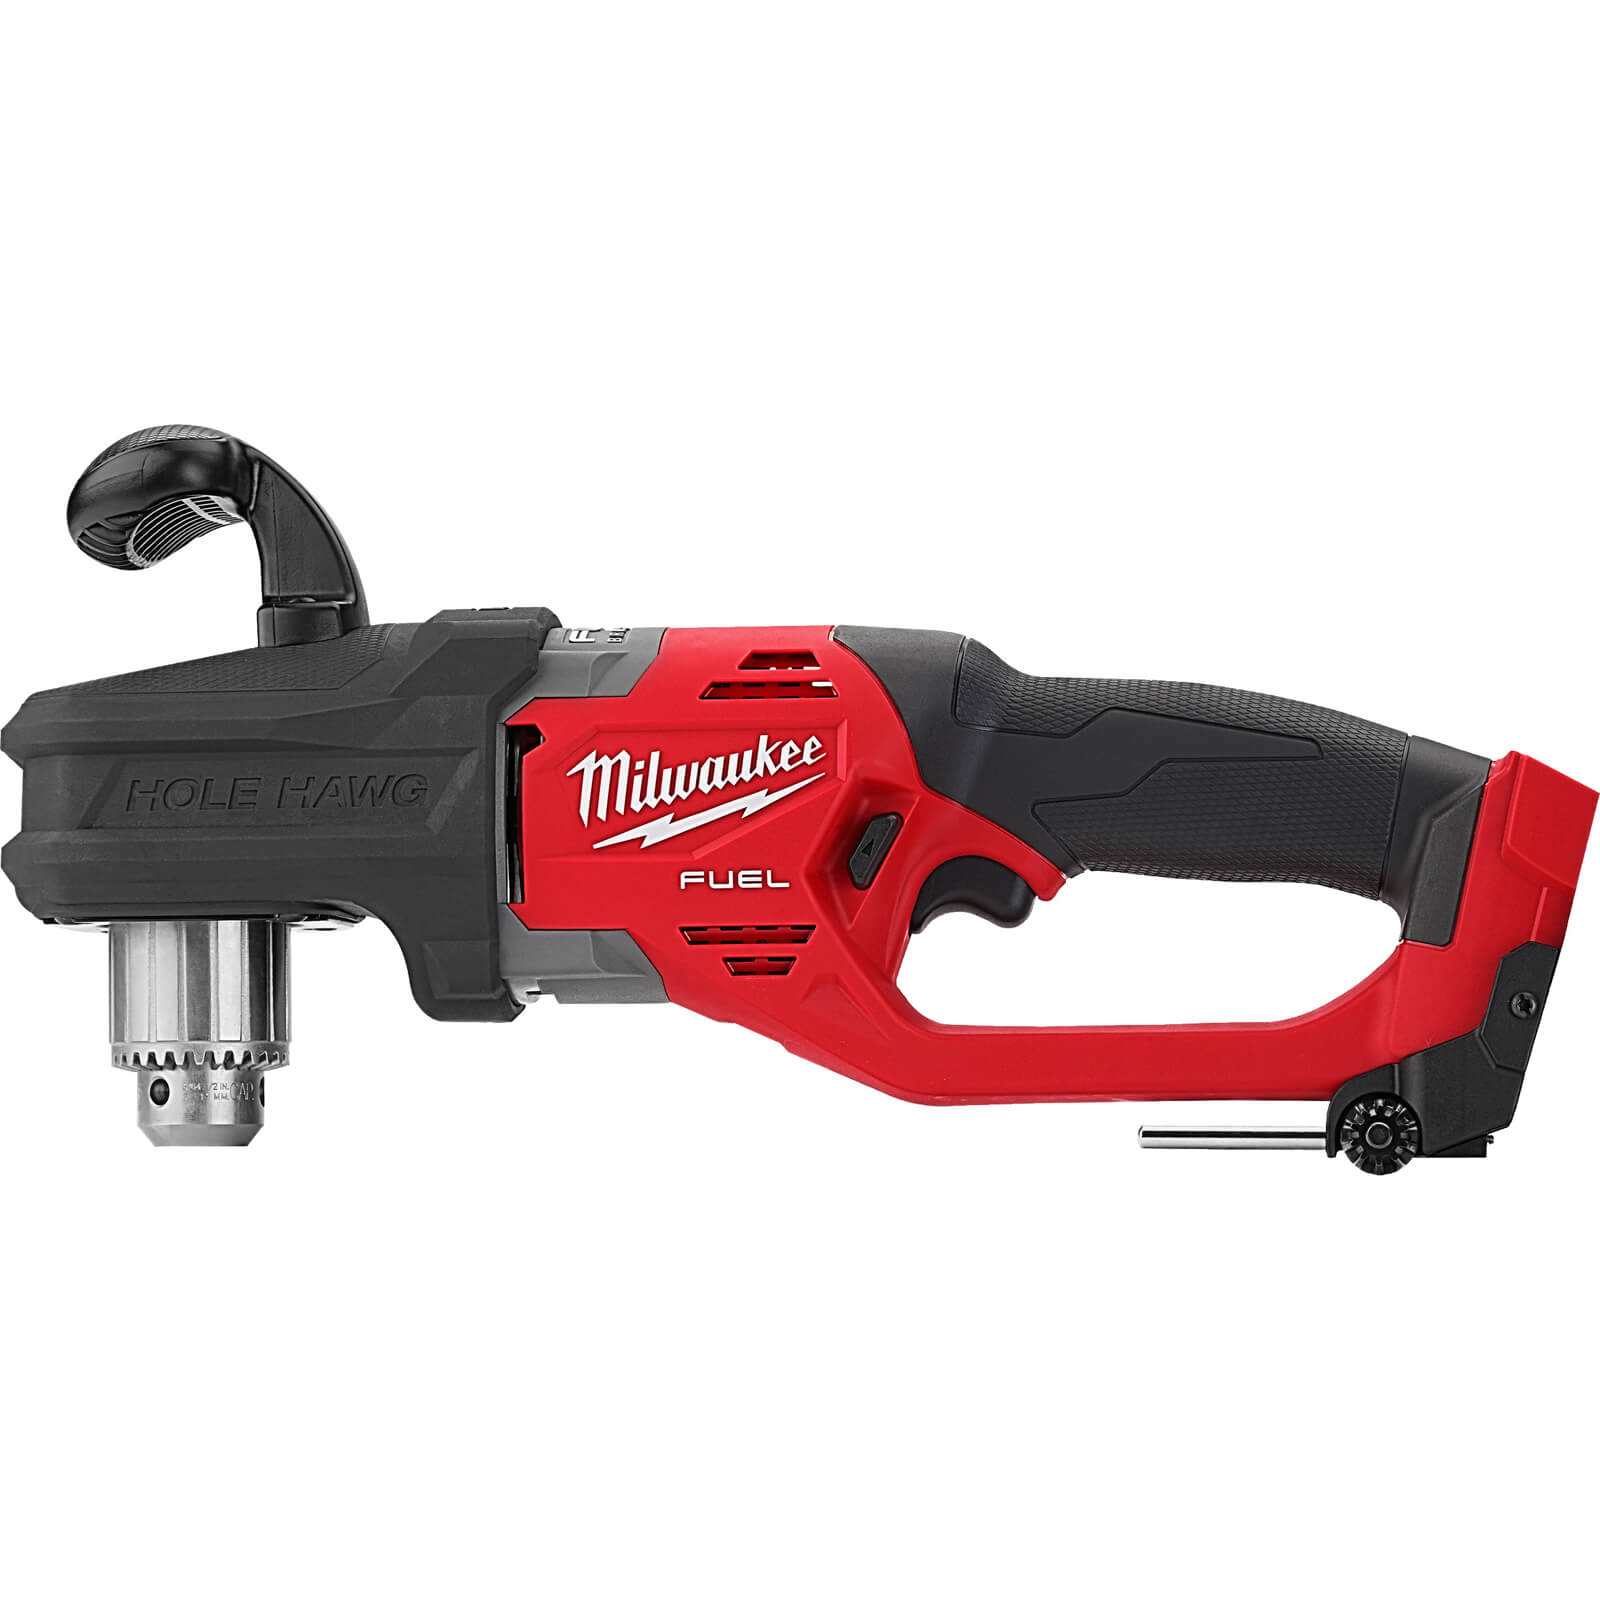 Image of Milwaukee M18 CRAD2 Fuel 18v Cordless Brushless Hole Hawg Angle Drill No Batteries No Charger Case